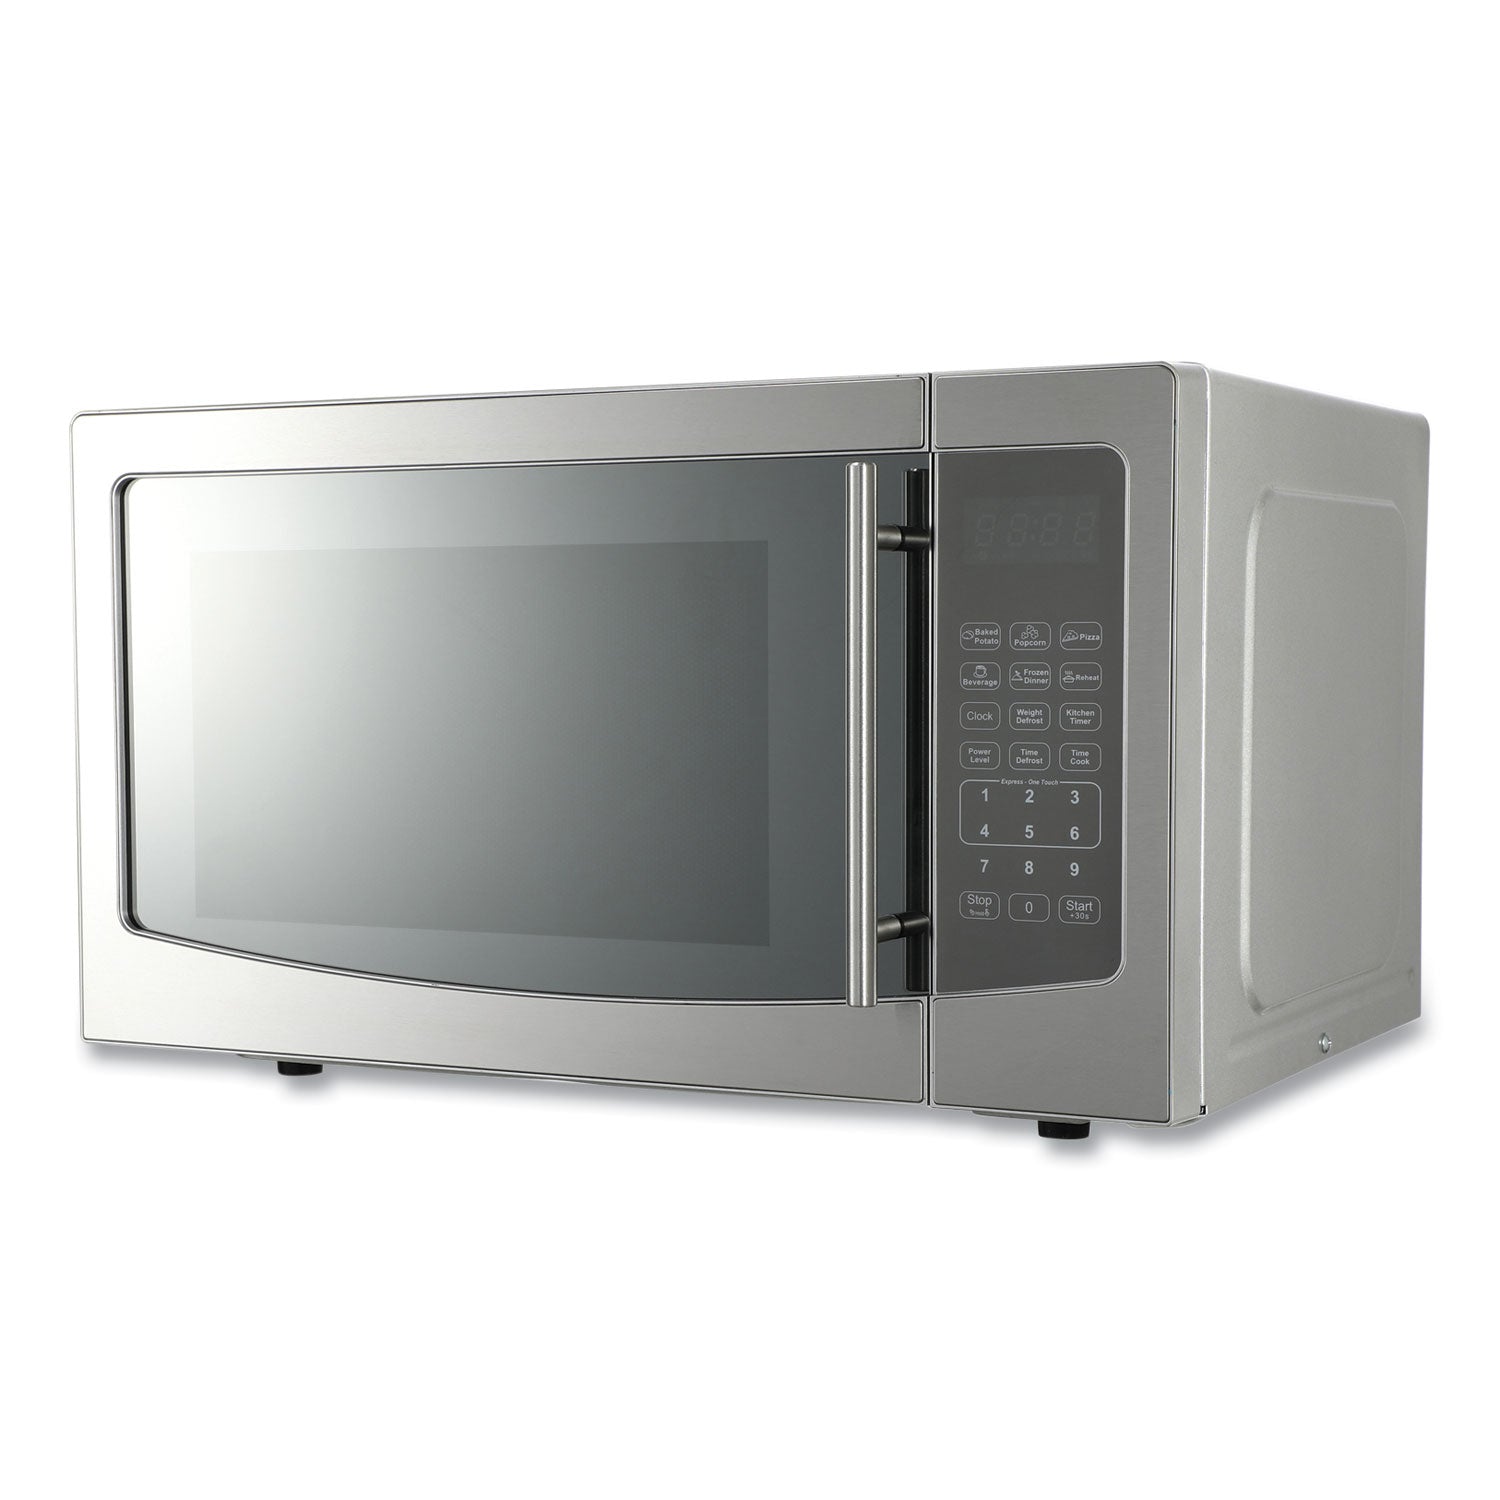 11-cu-ft-stainless-steel-microwave-oven-1000-w-mirror-finish_avamt116v4m - 1